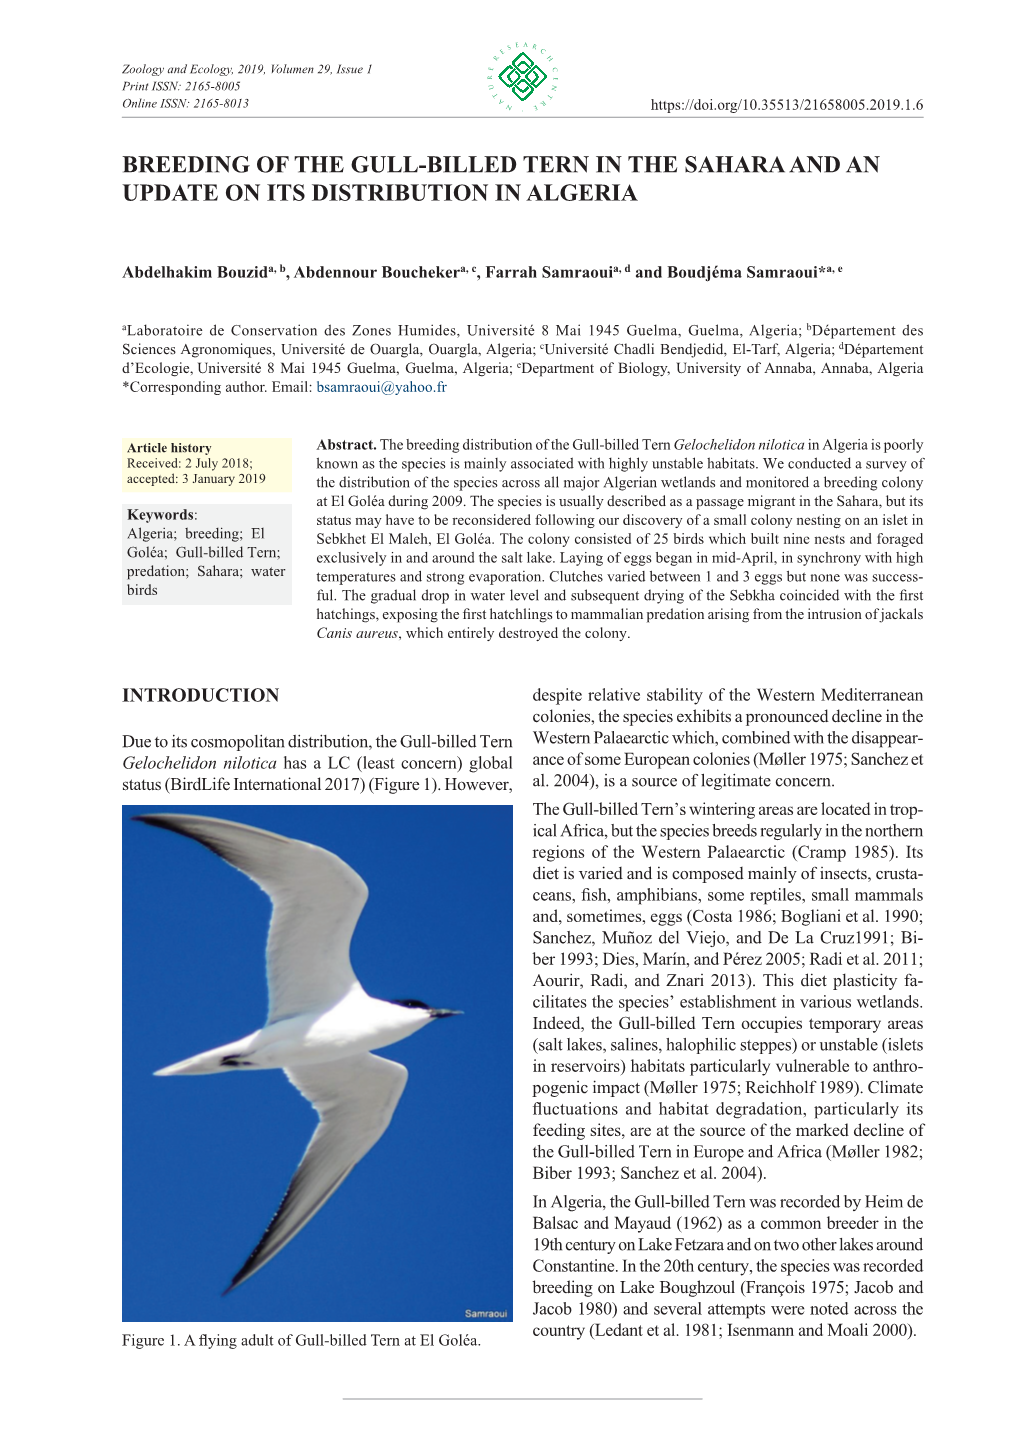 Breeding of the Gull-Billed Tern in the Sahara and an Update on Its Distribution in Algeria